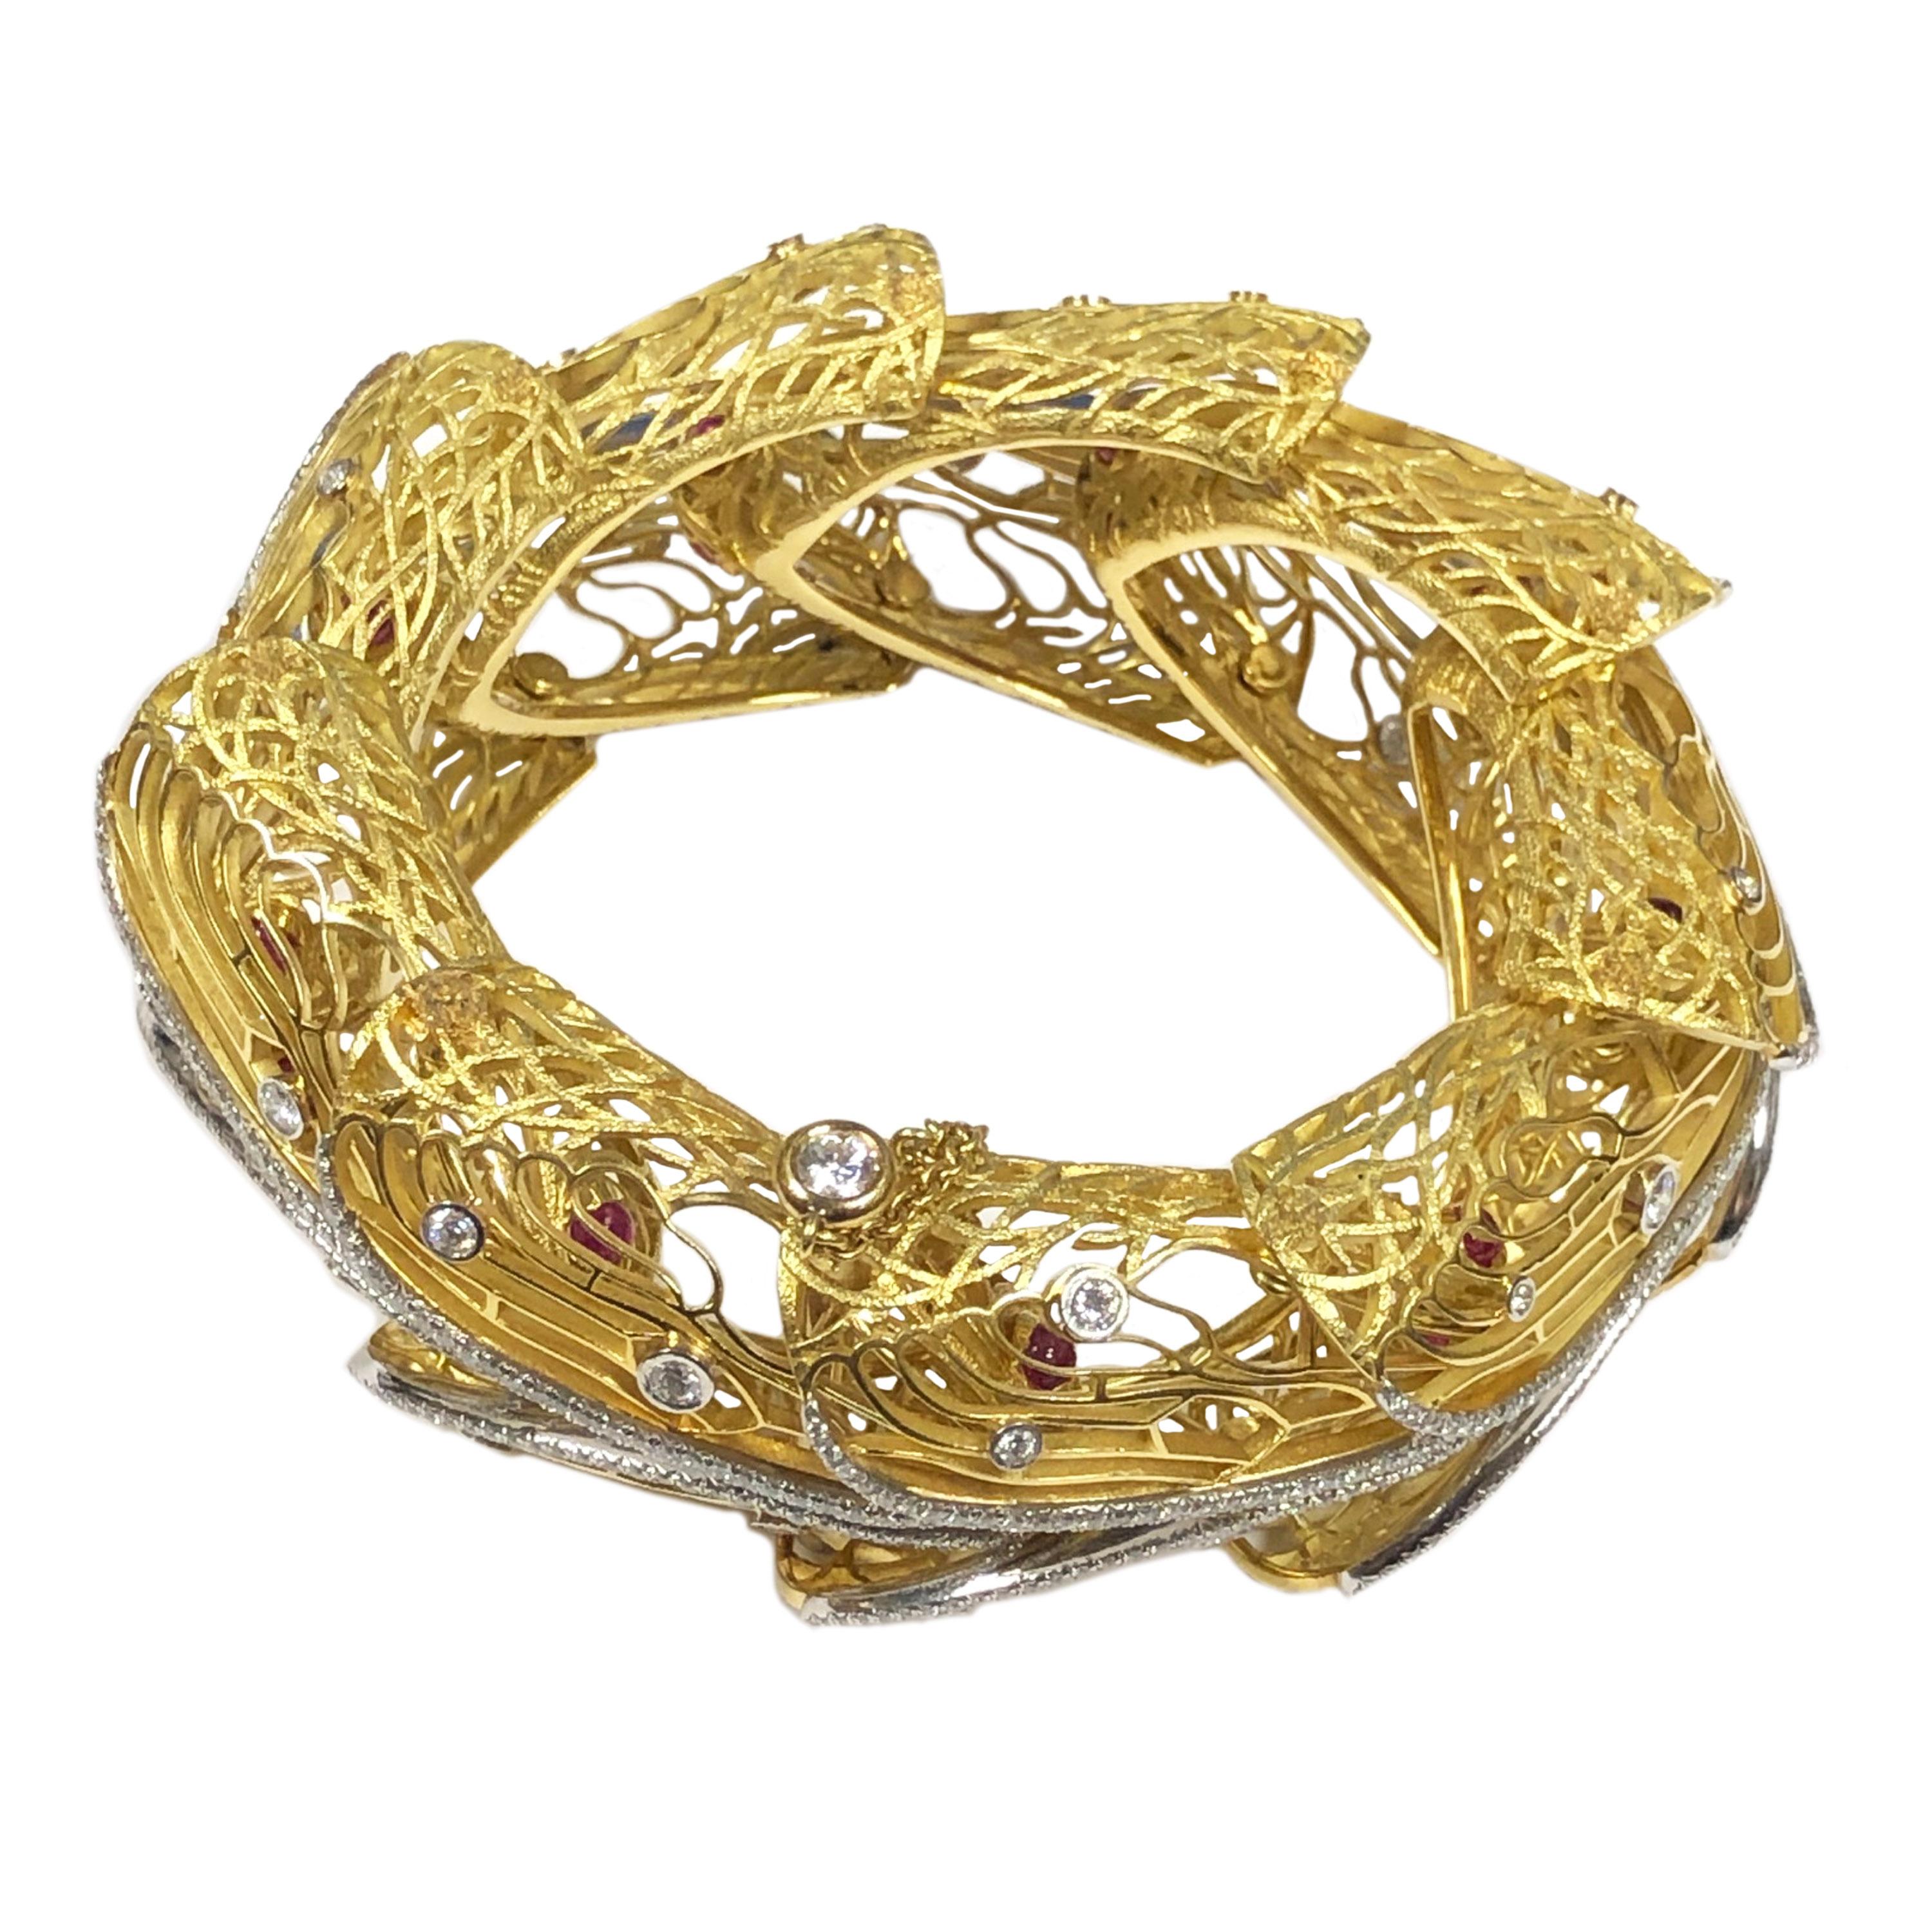 Circa 2008 Nicholas Varney Cicada Bracelet, the 18K Yellow Gold and Platinum amazing massive Bracelet is all hand fabricated with each individual section perfectly articulated for movement. Set with 8 to 9 carats of round brilliant cut Diamonds